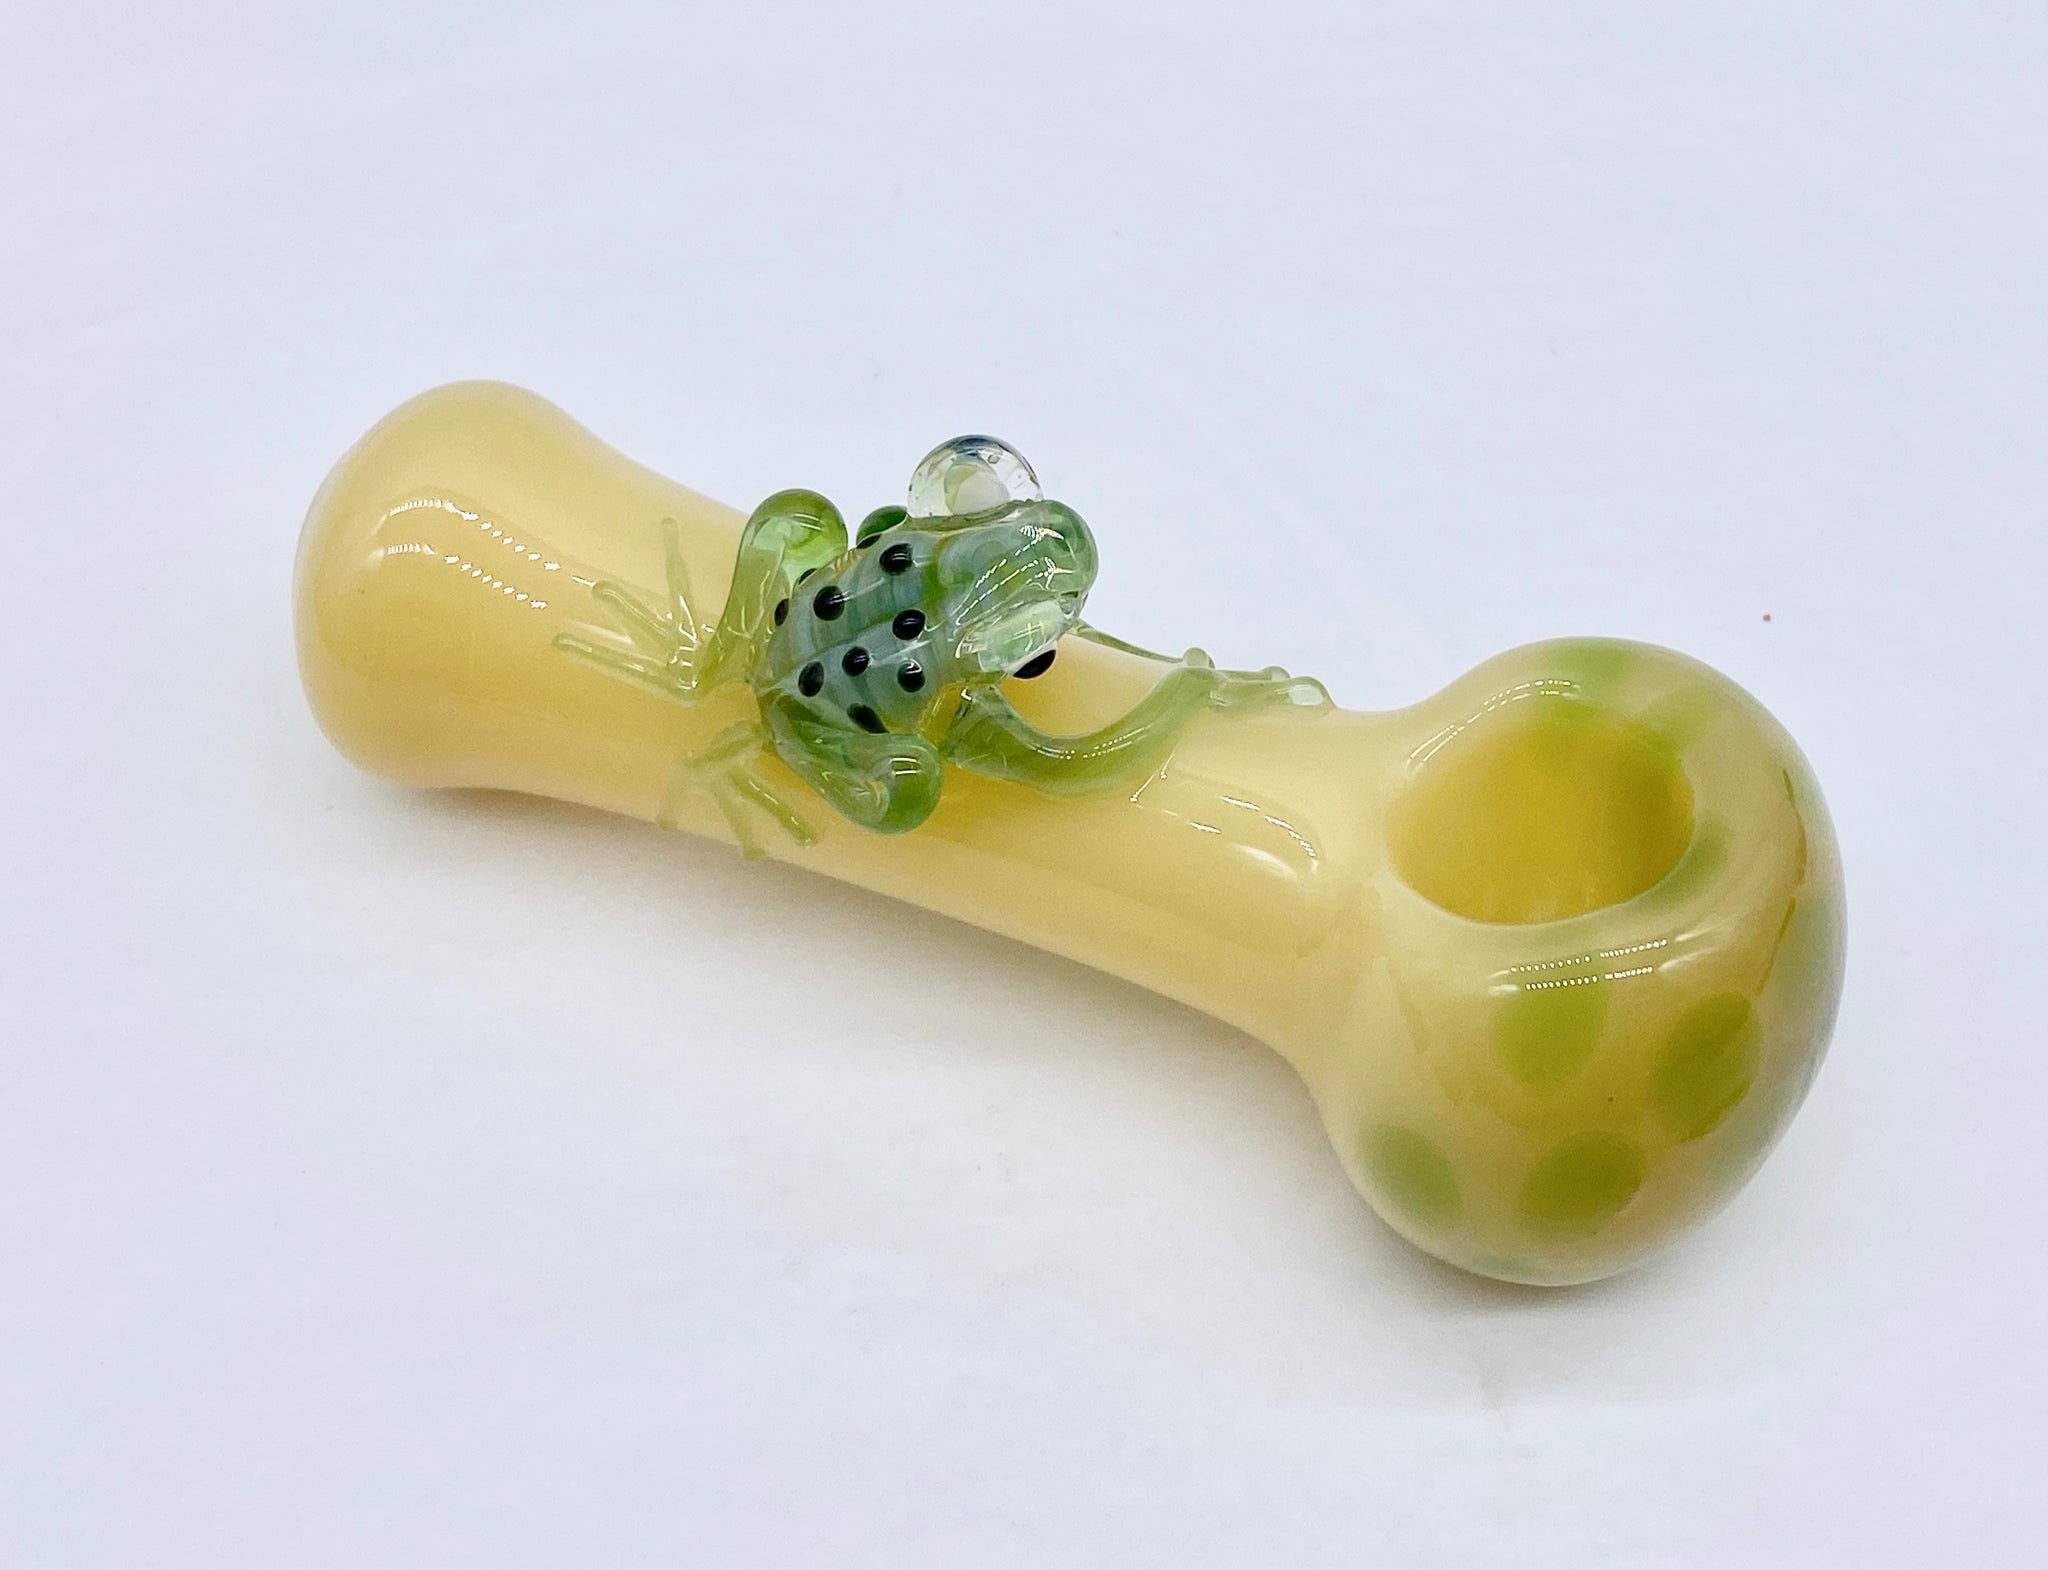 Glass Pipes Yellow Frog Glass Pipes For Smoking